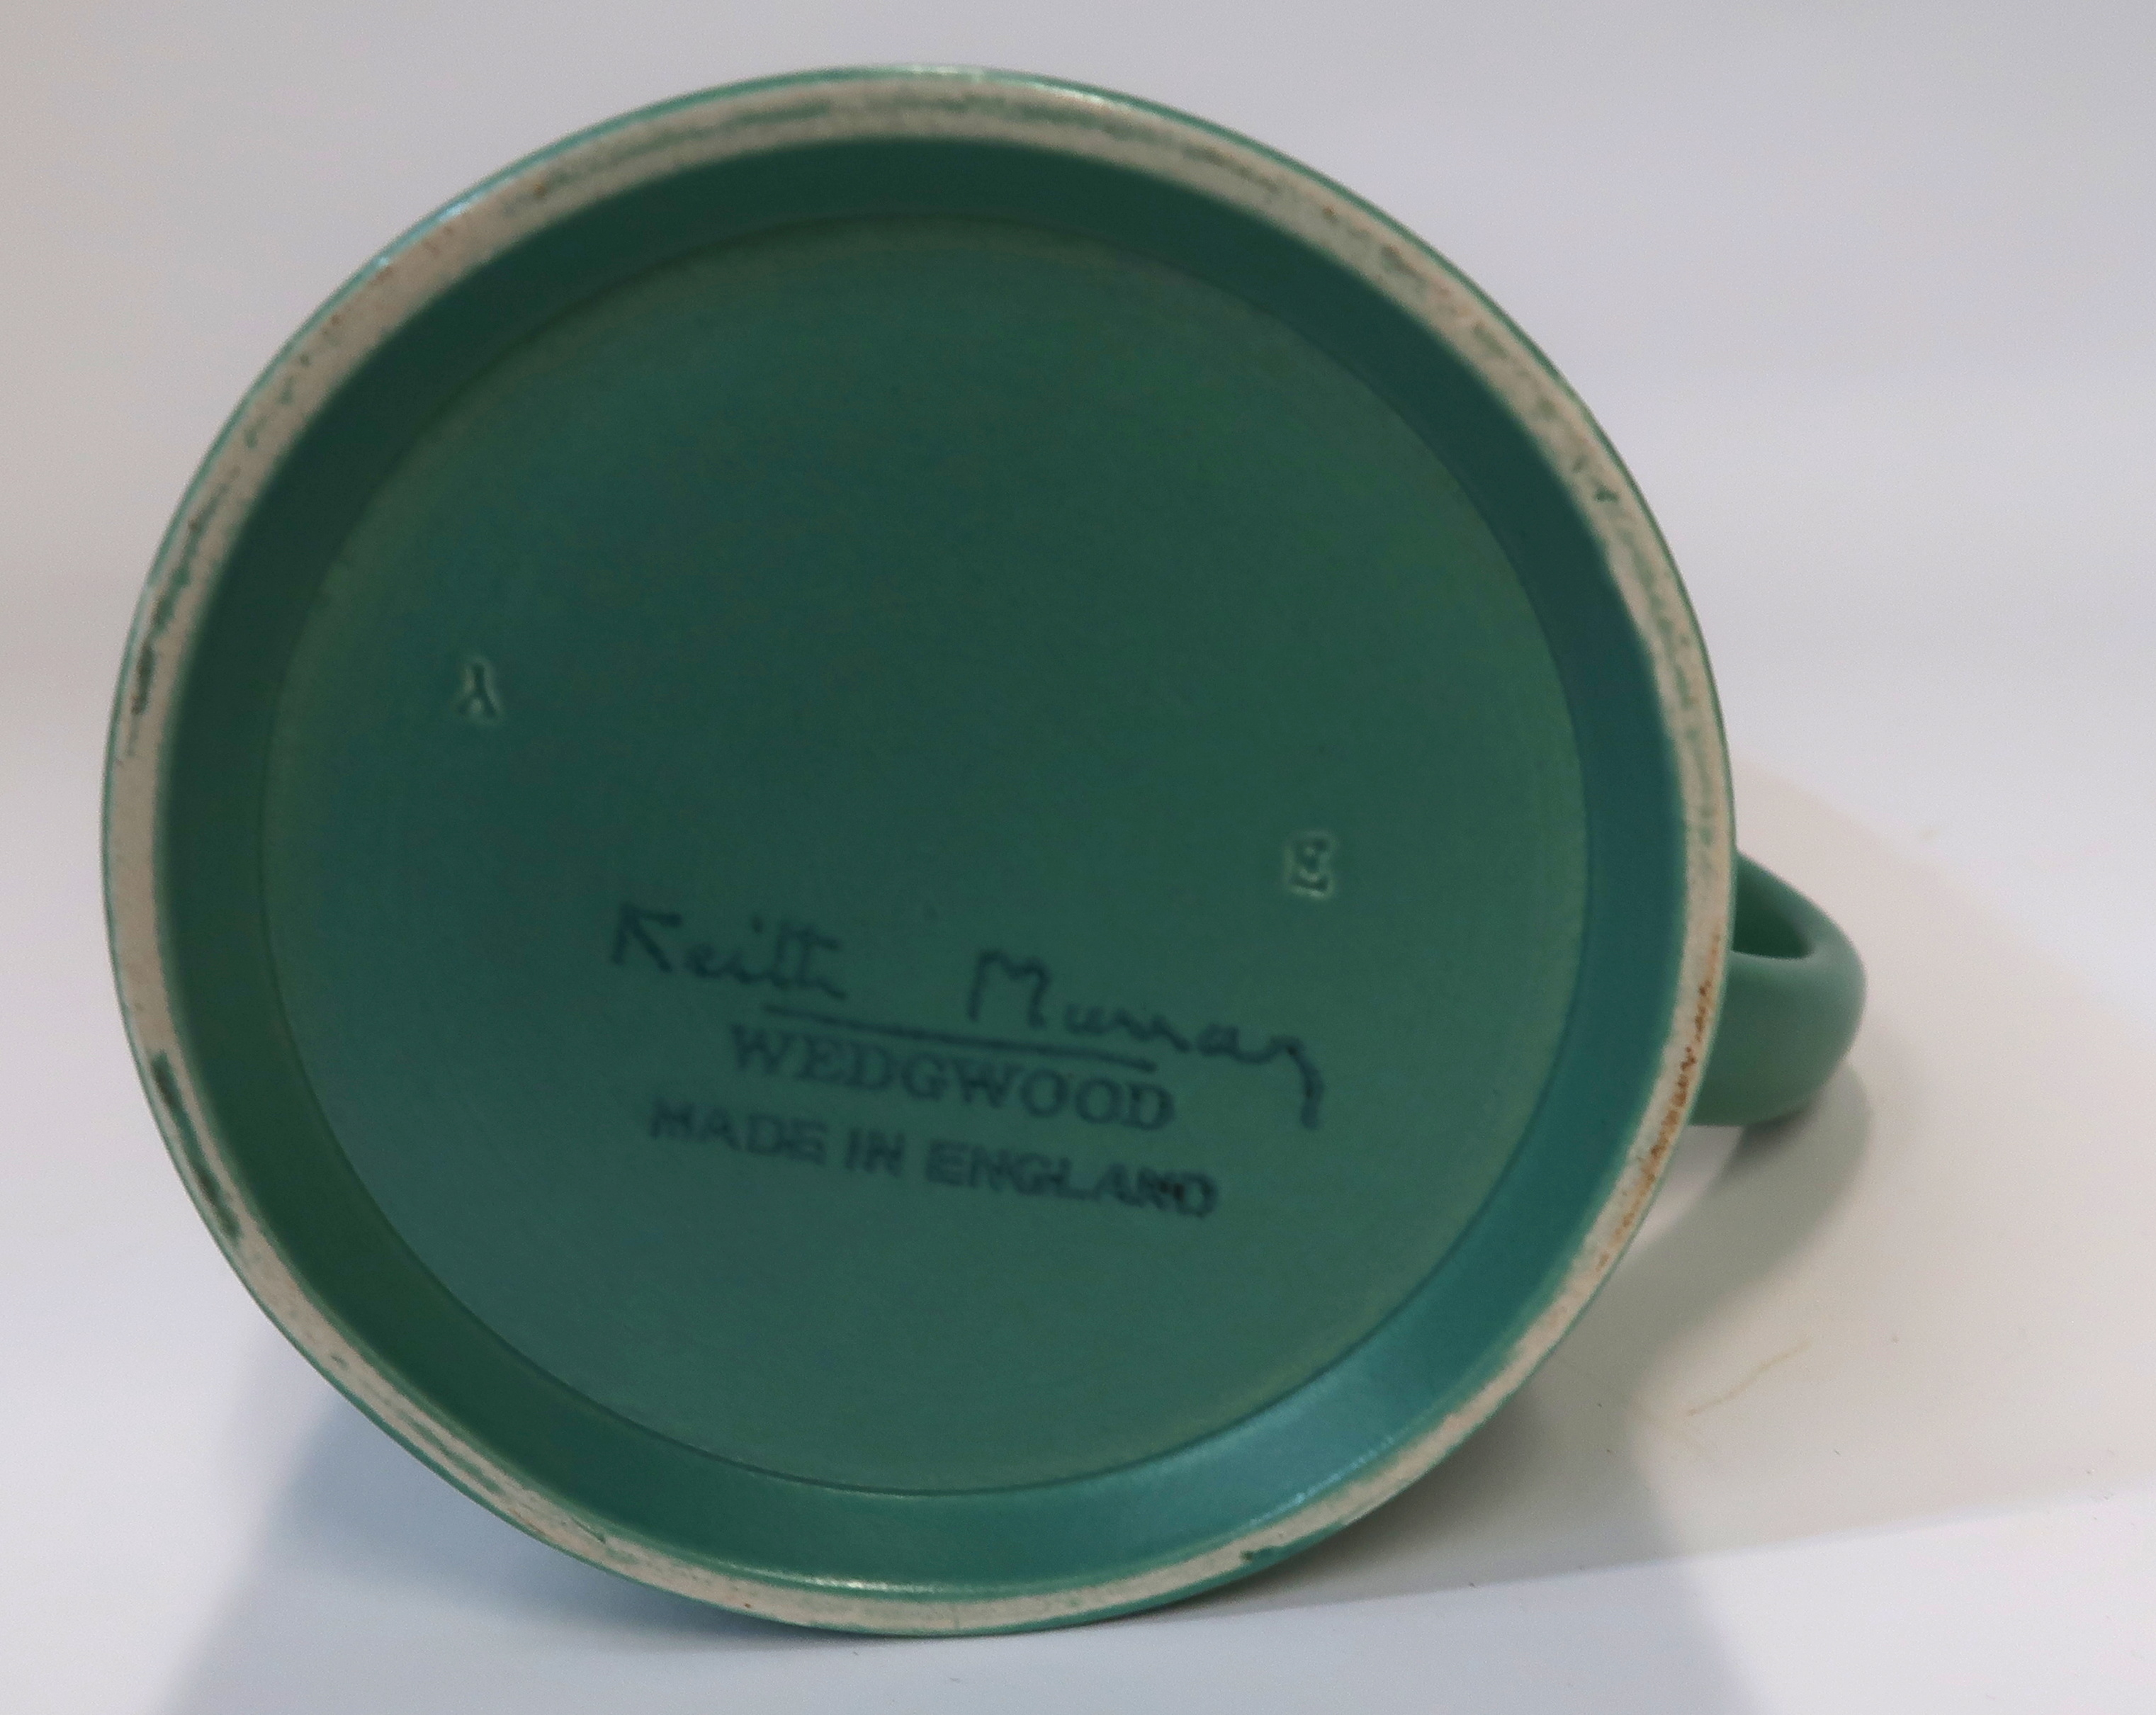 Five Keith Murray for Wedgwood Matt Straw glaze tankards, two green examples and five cups and six - Image 2 of 3